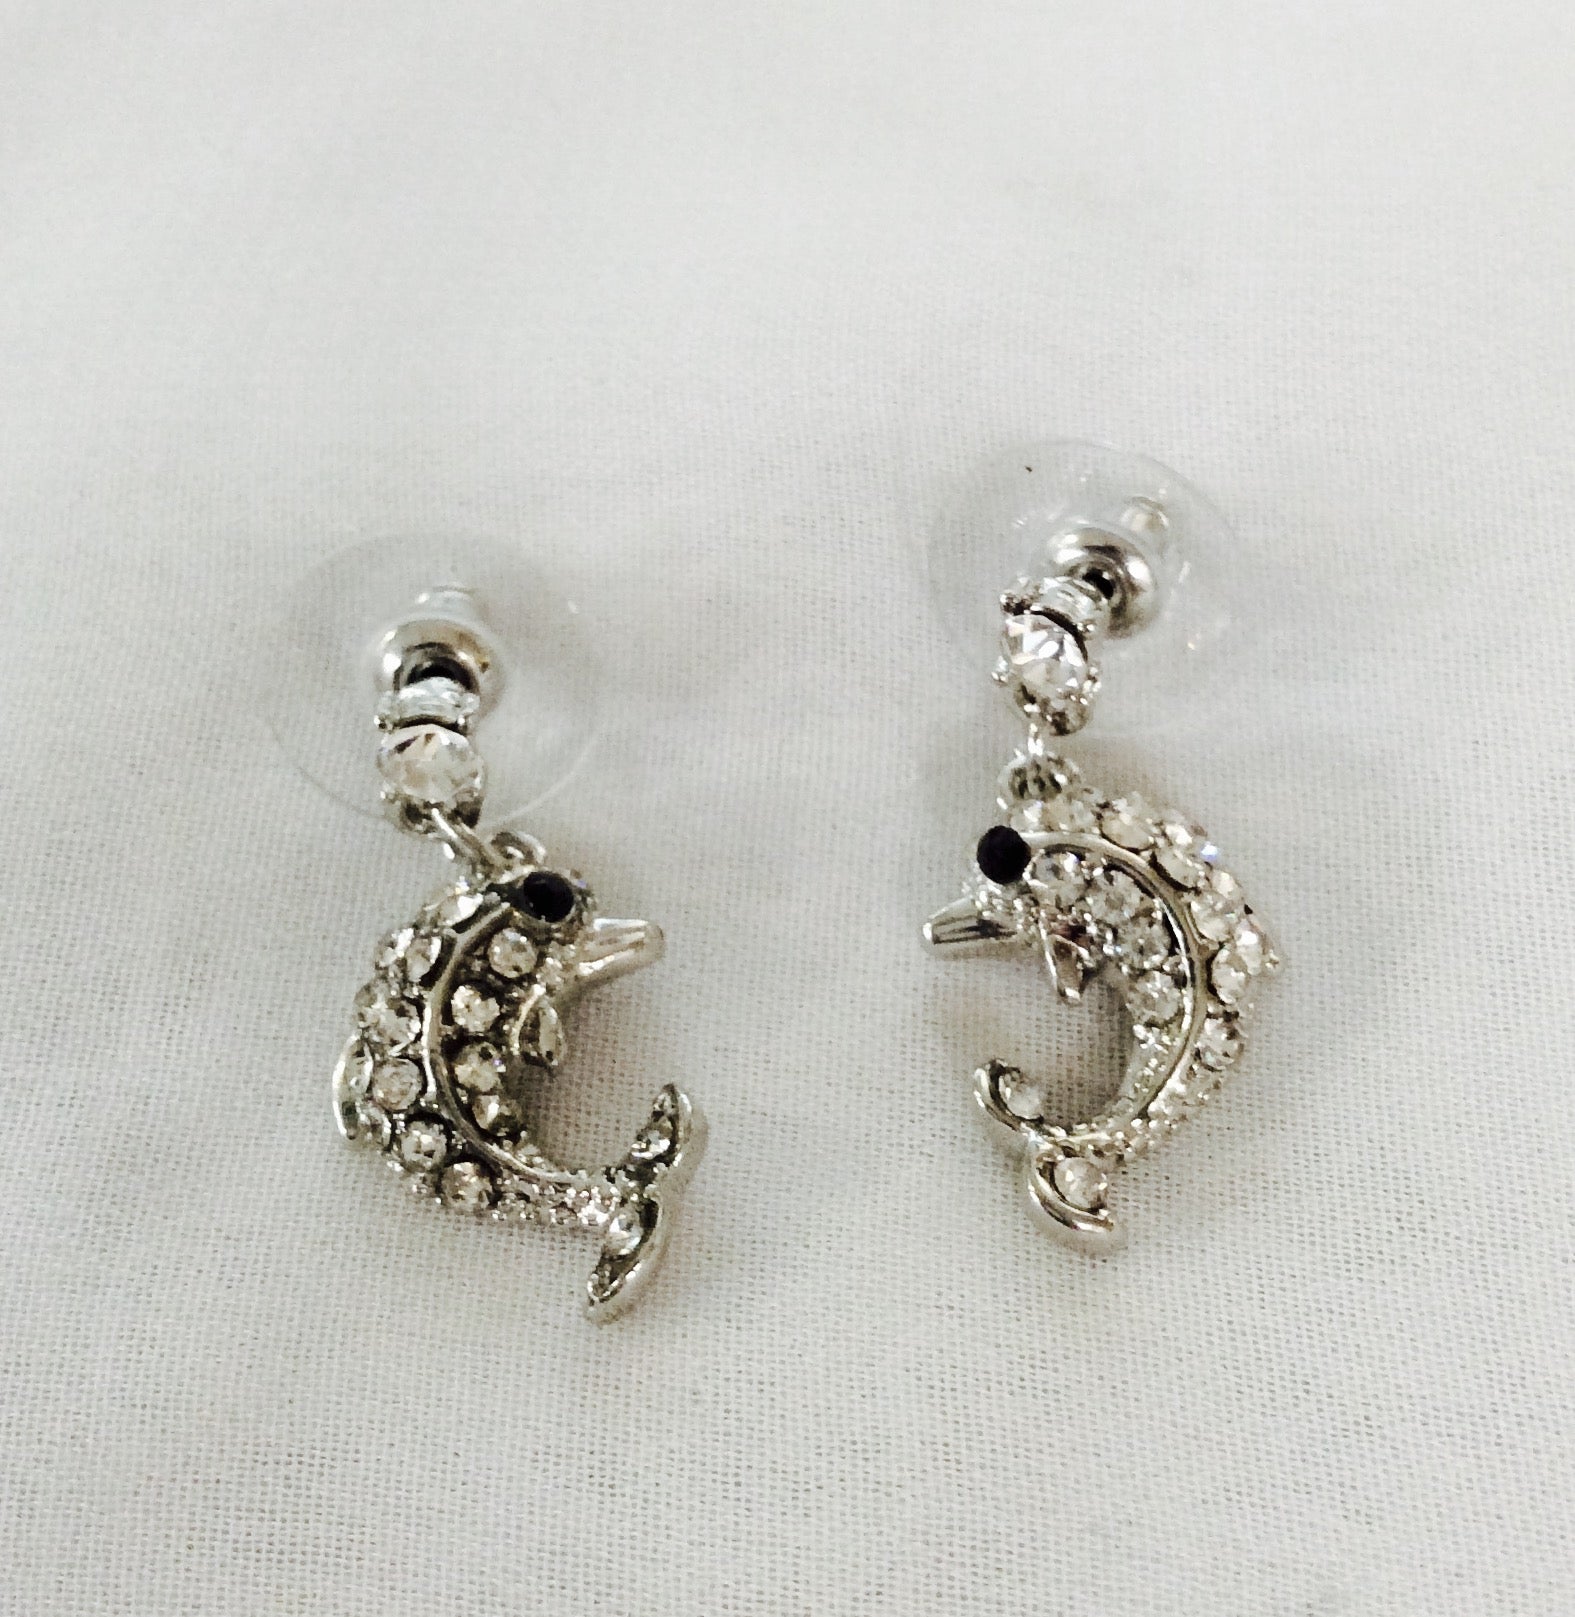 Small Dolphin Earrings #12-21570CL